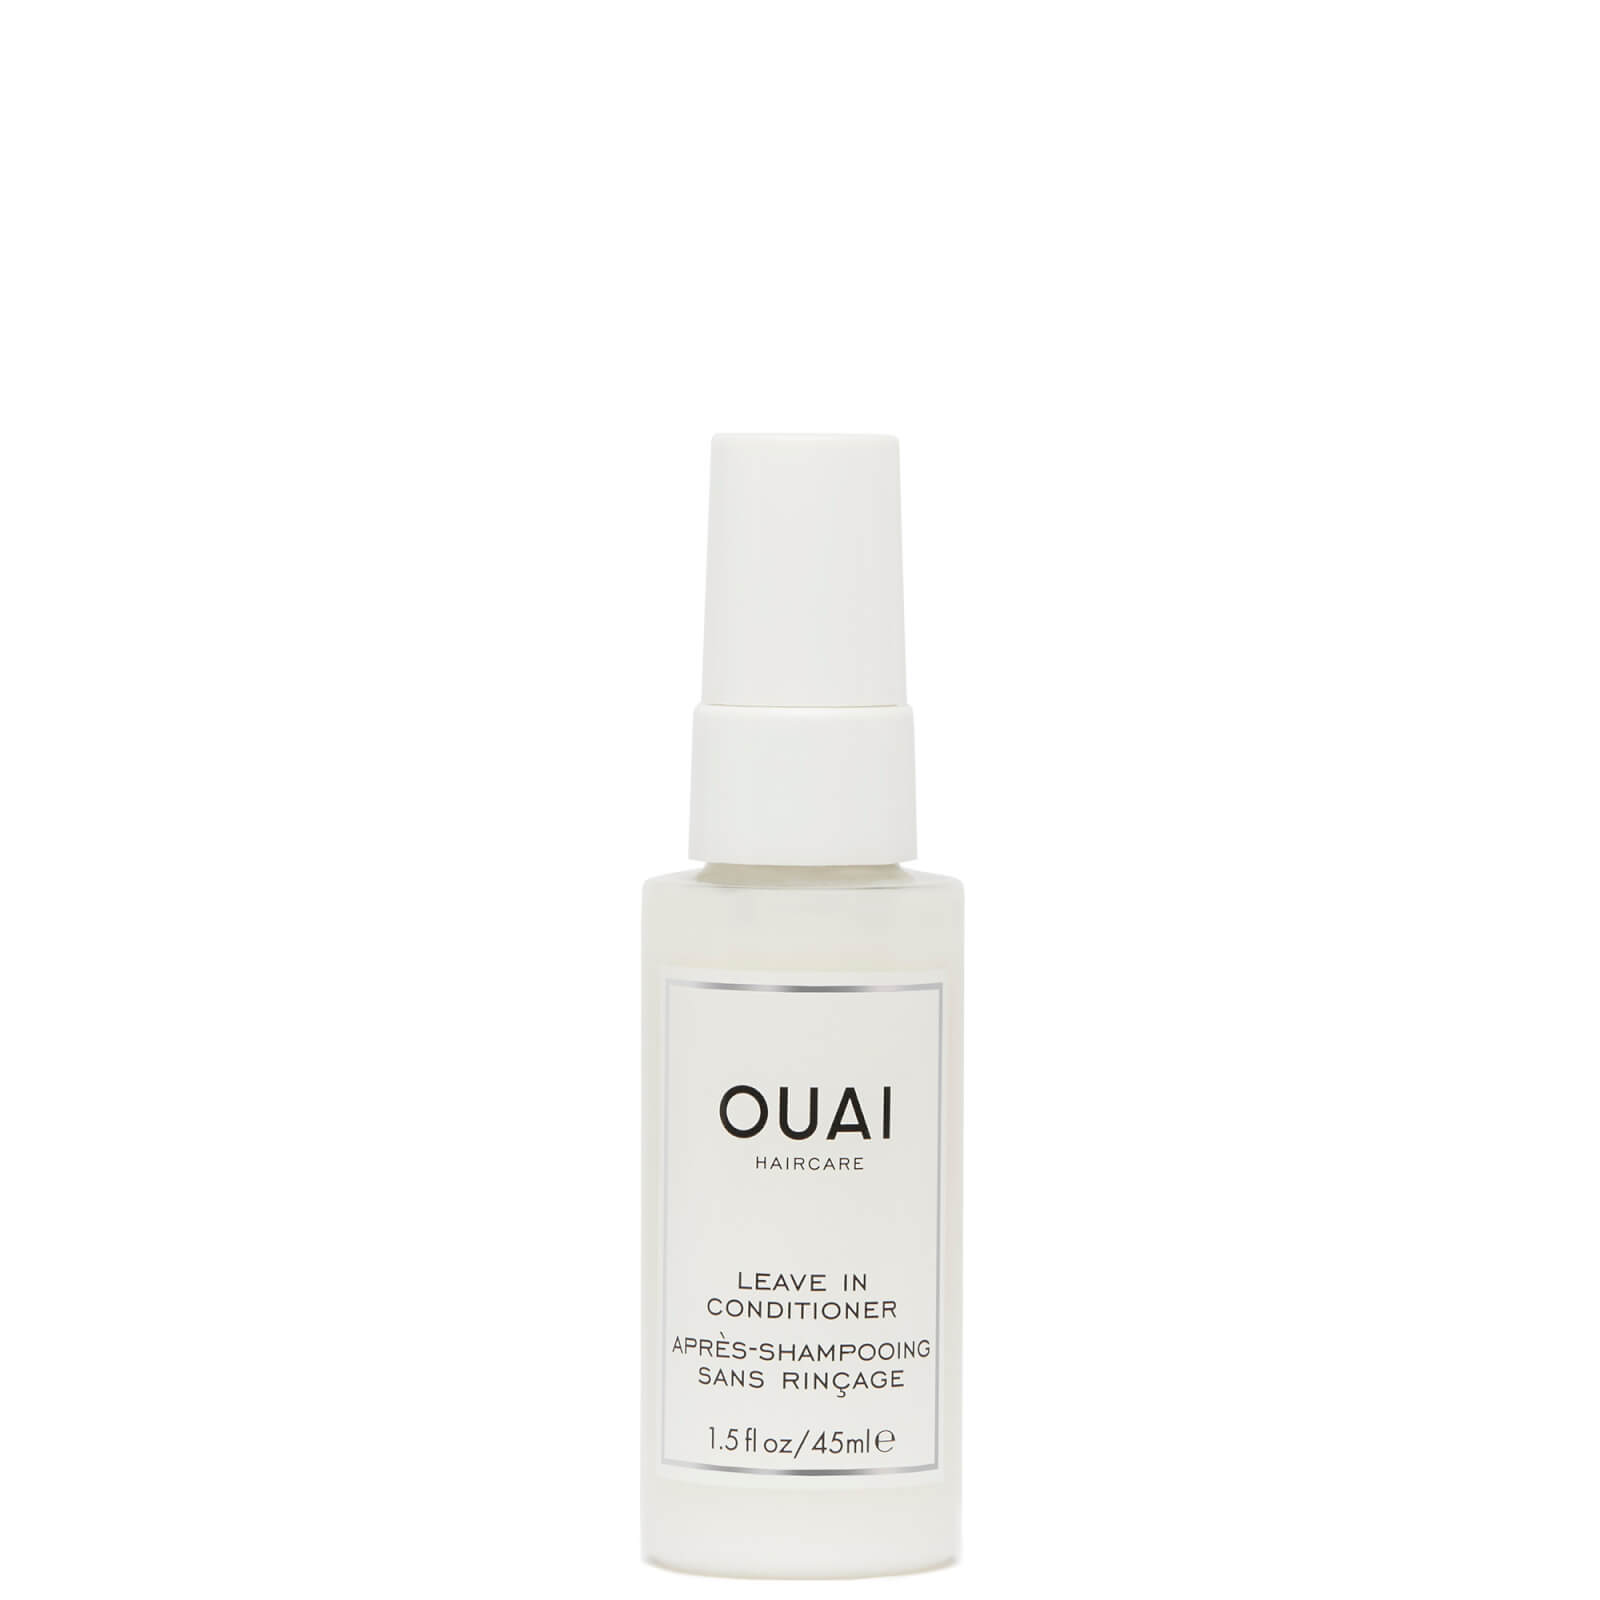 OUAI Leave In Conditioner Travel - 45ml product